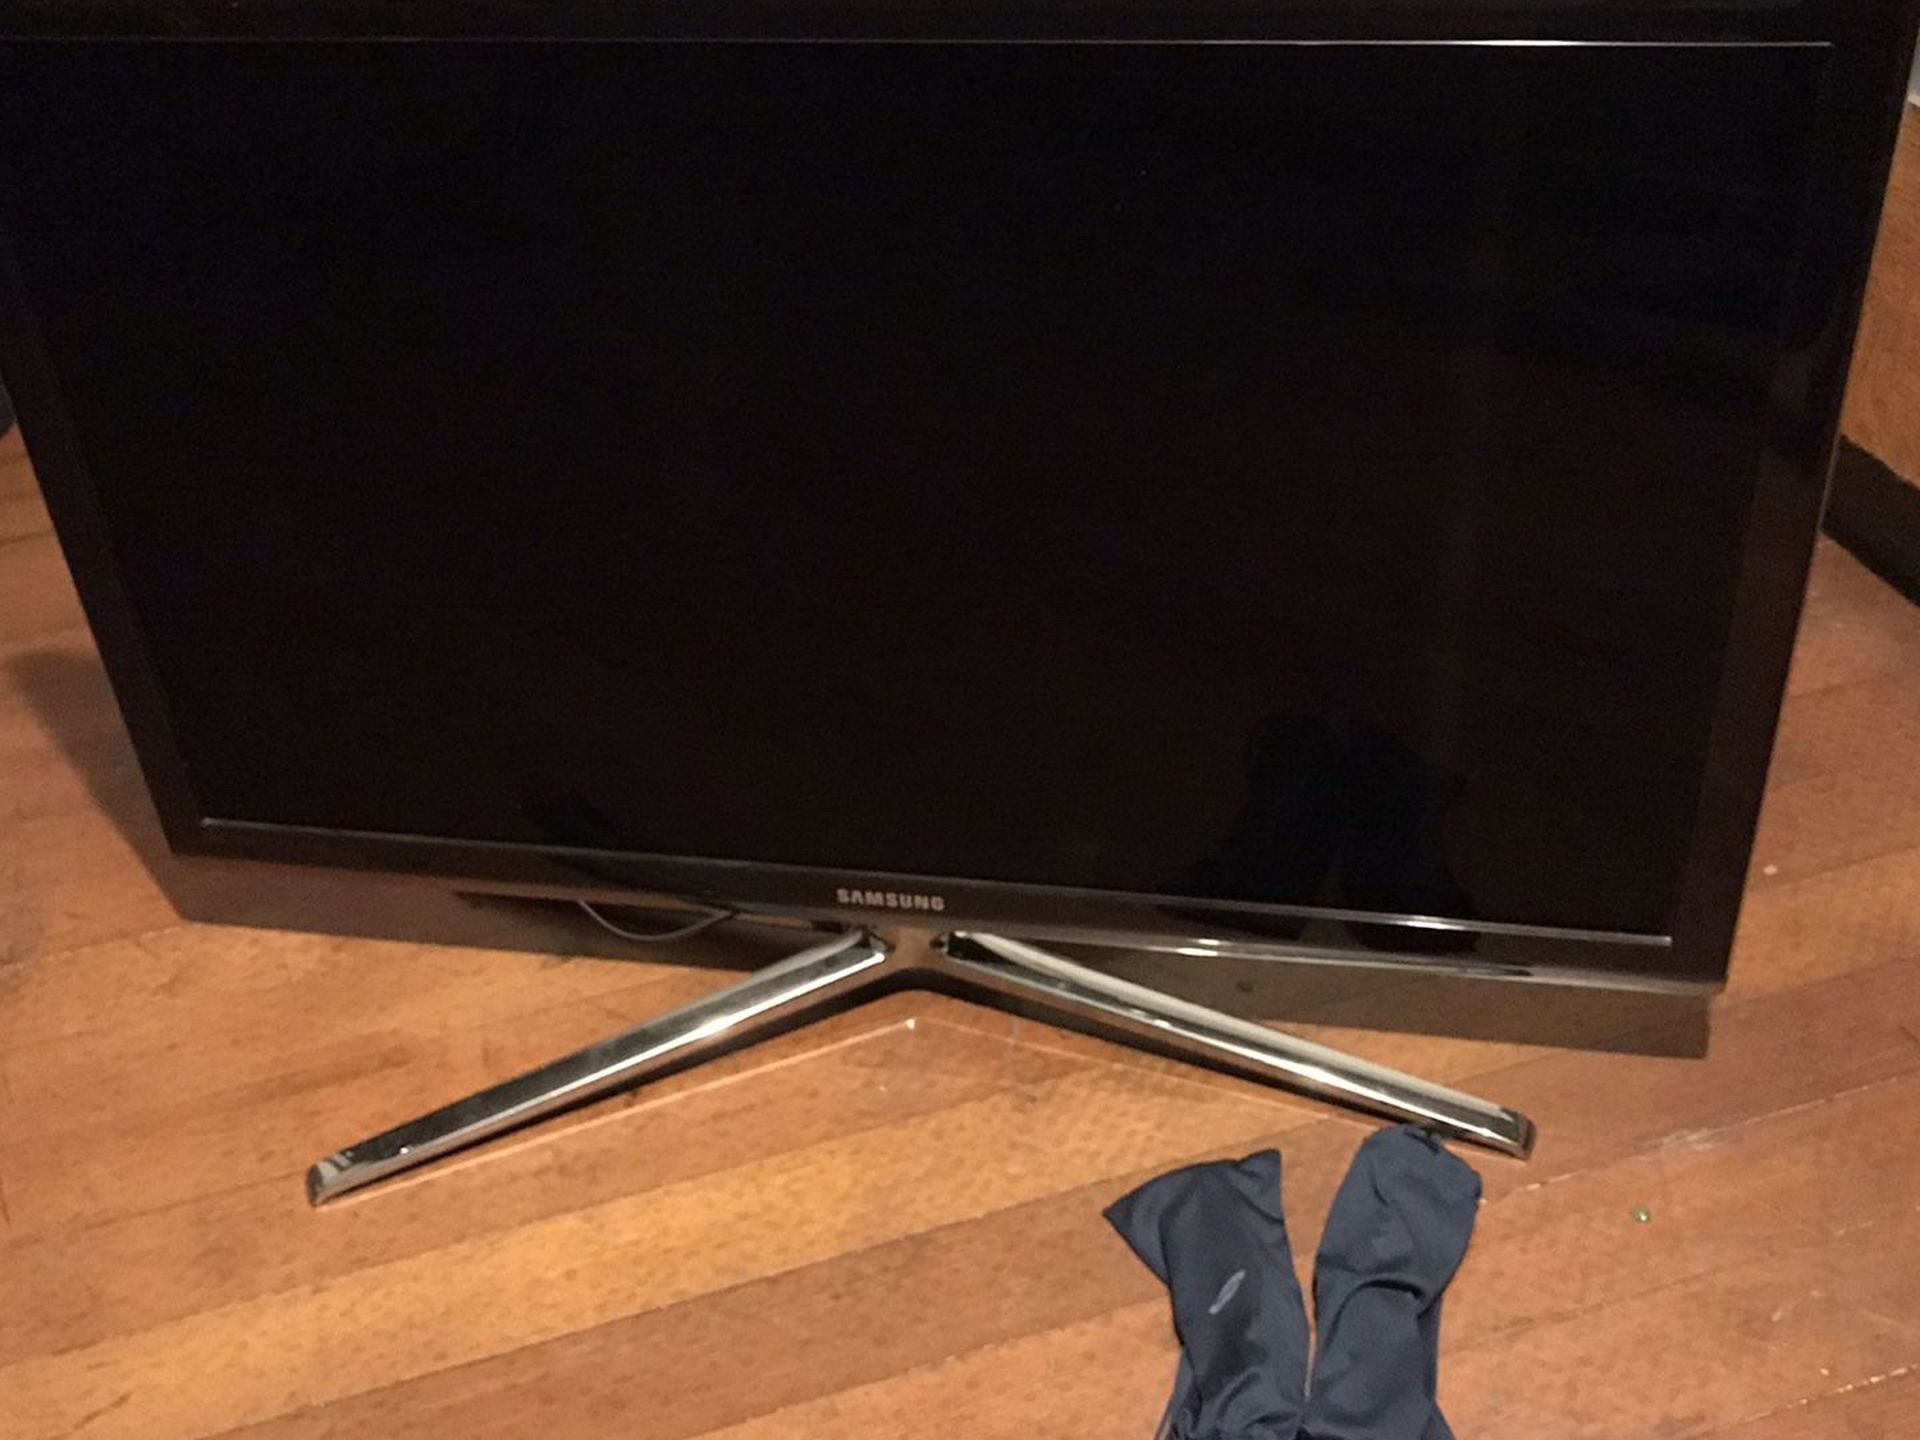 Samsung 3D 40” TV with 2 Pairs of Glasses